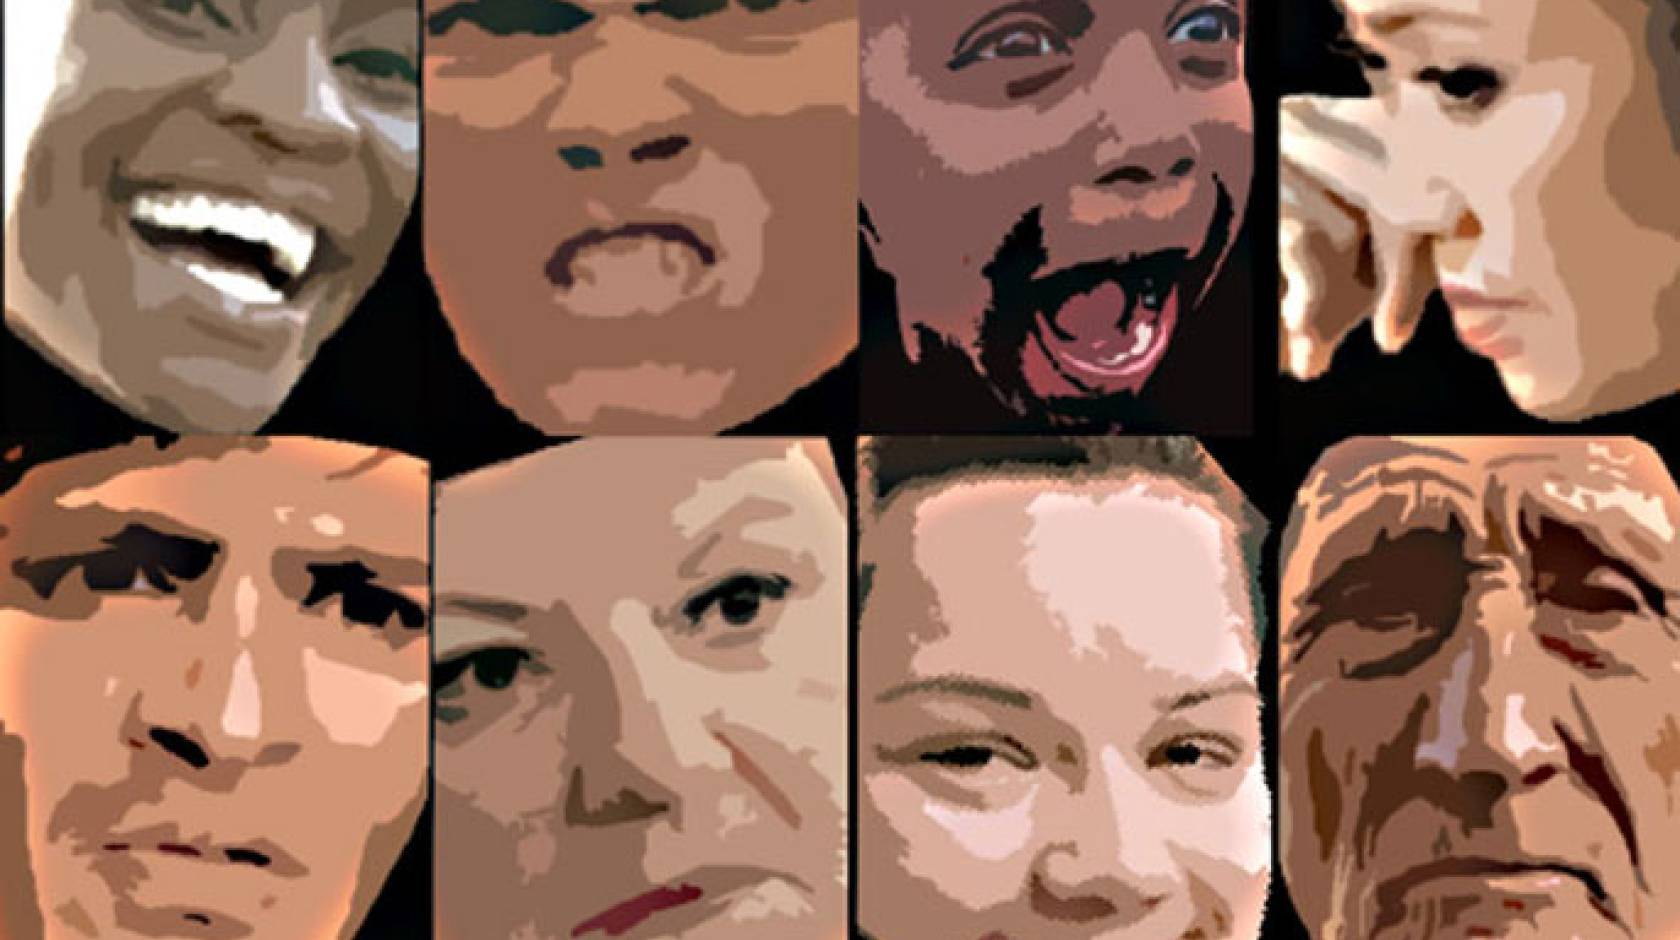 A series of different faces making different facial expressions